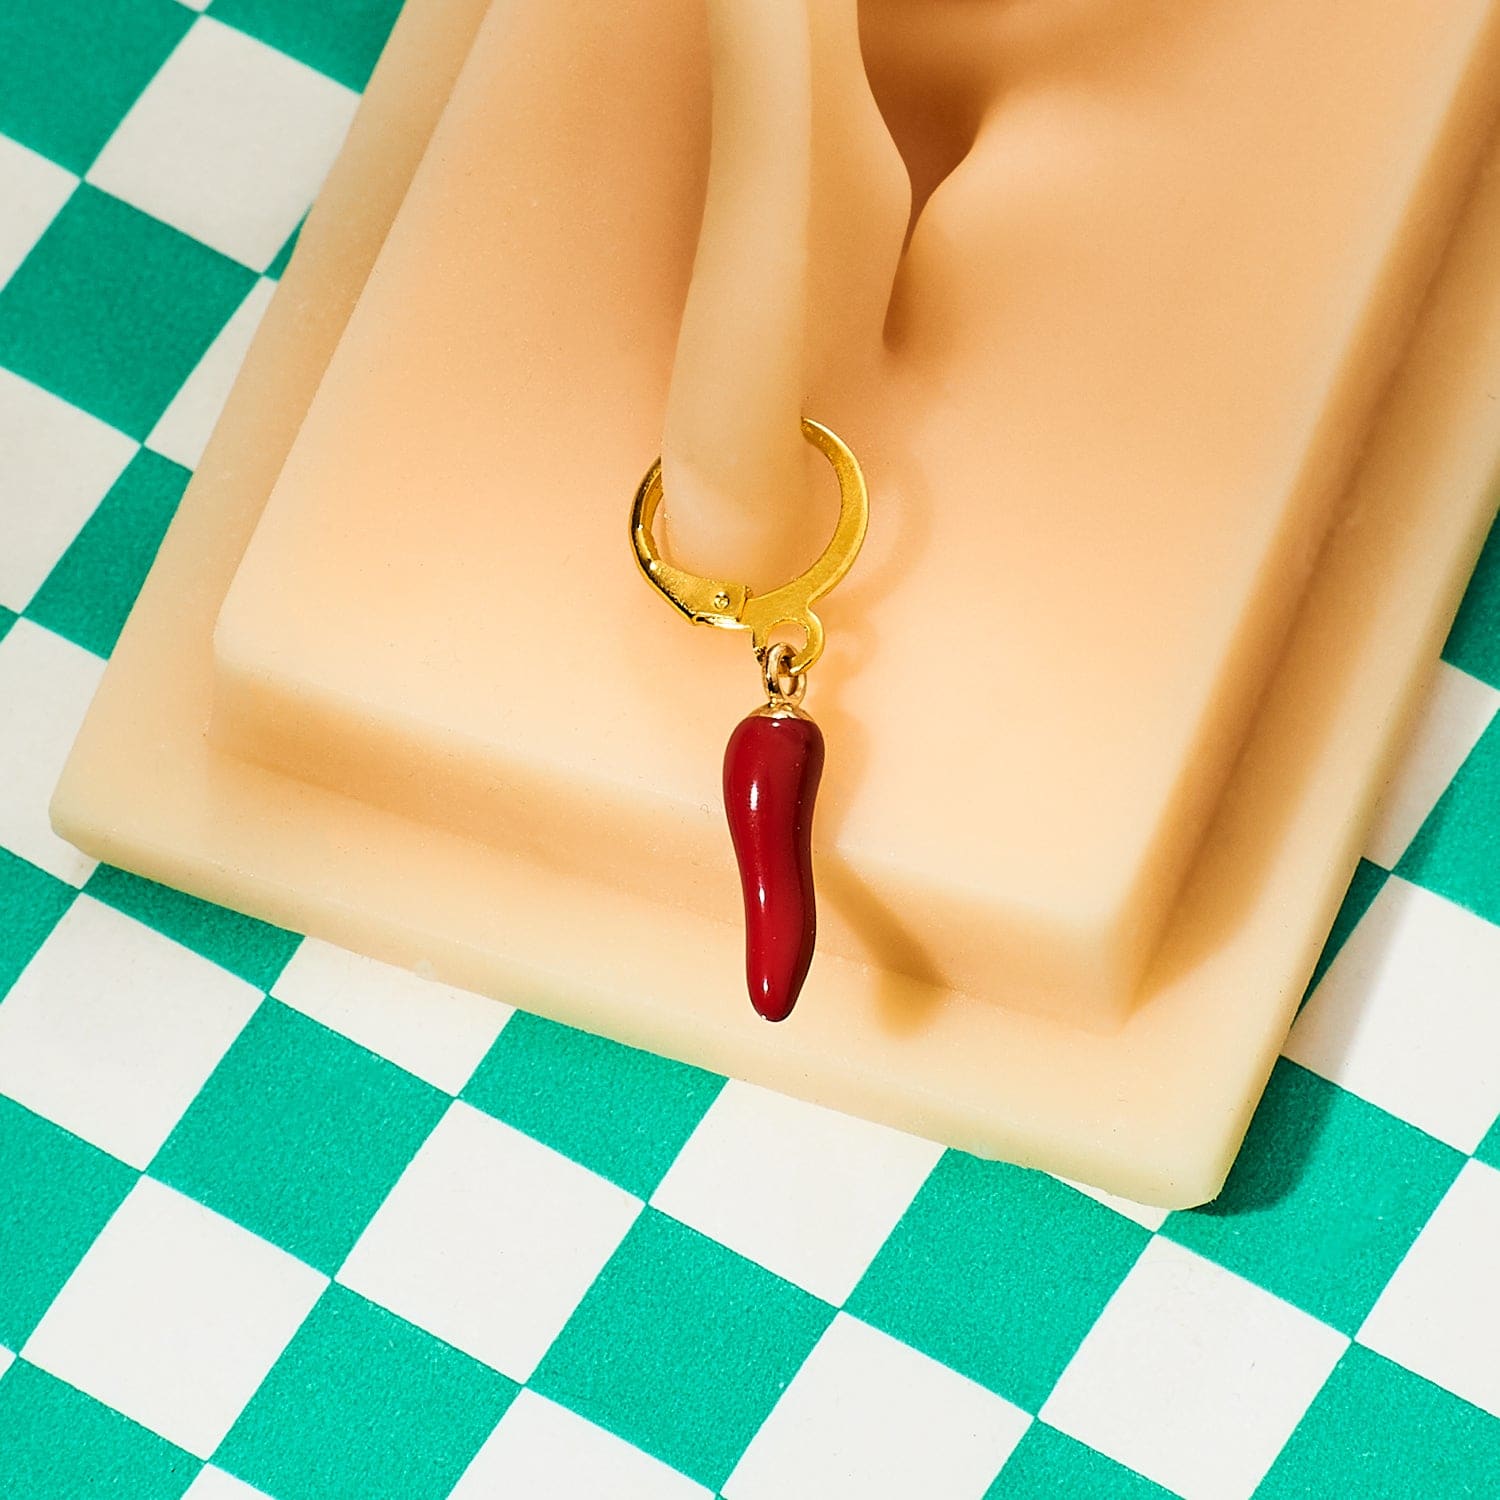 Chili Pepper Huggie Earrings Groupbycolor - Lol - Novelty